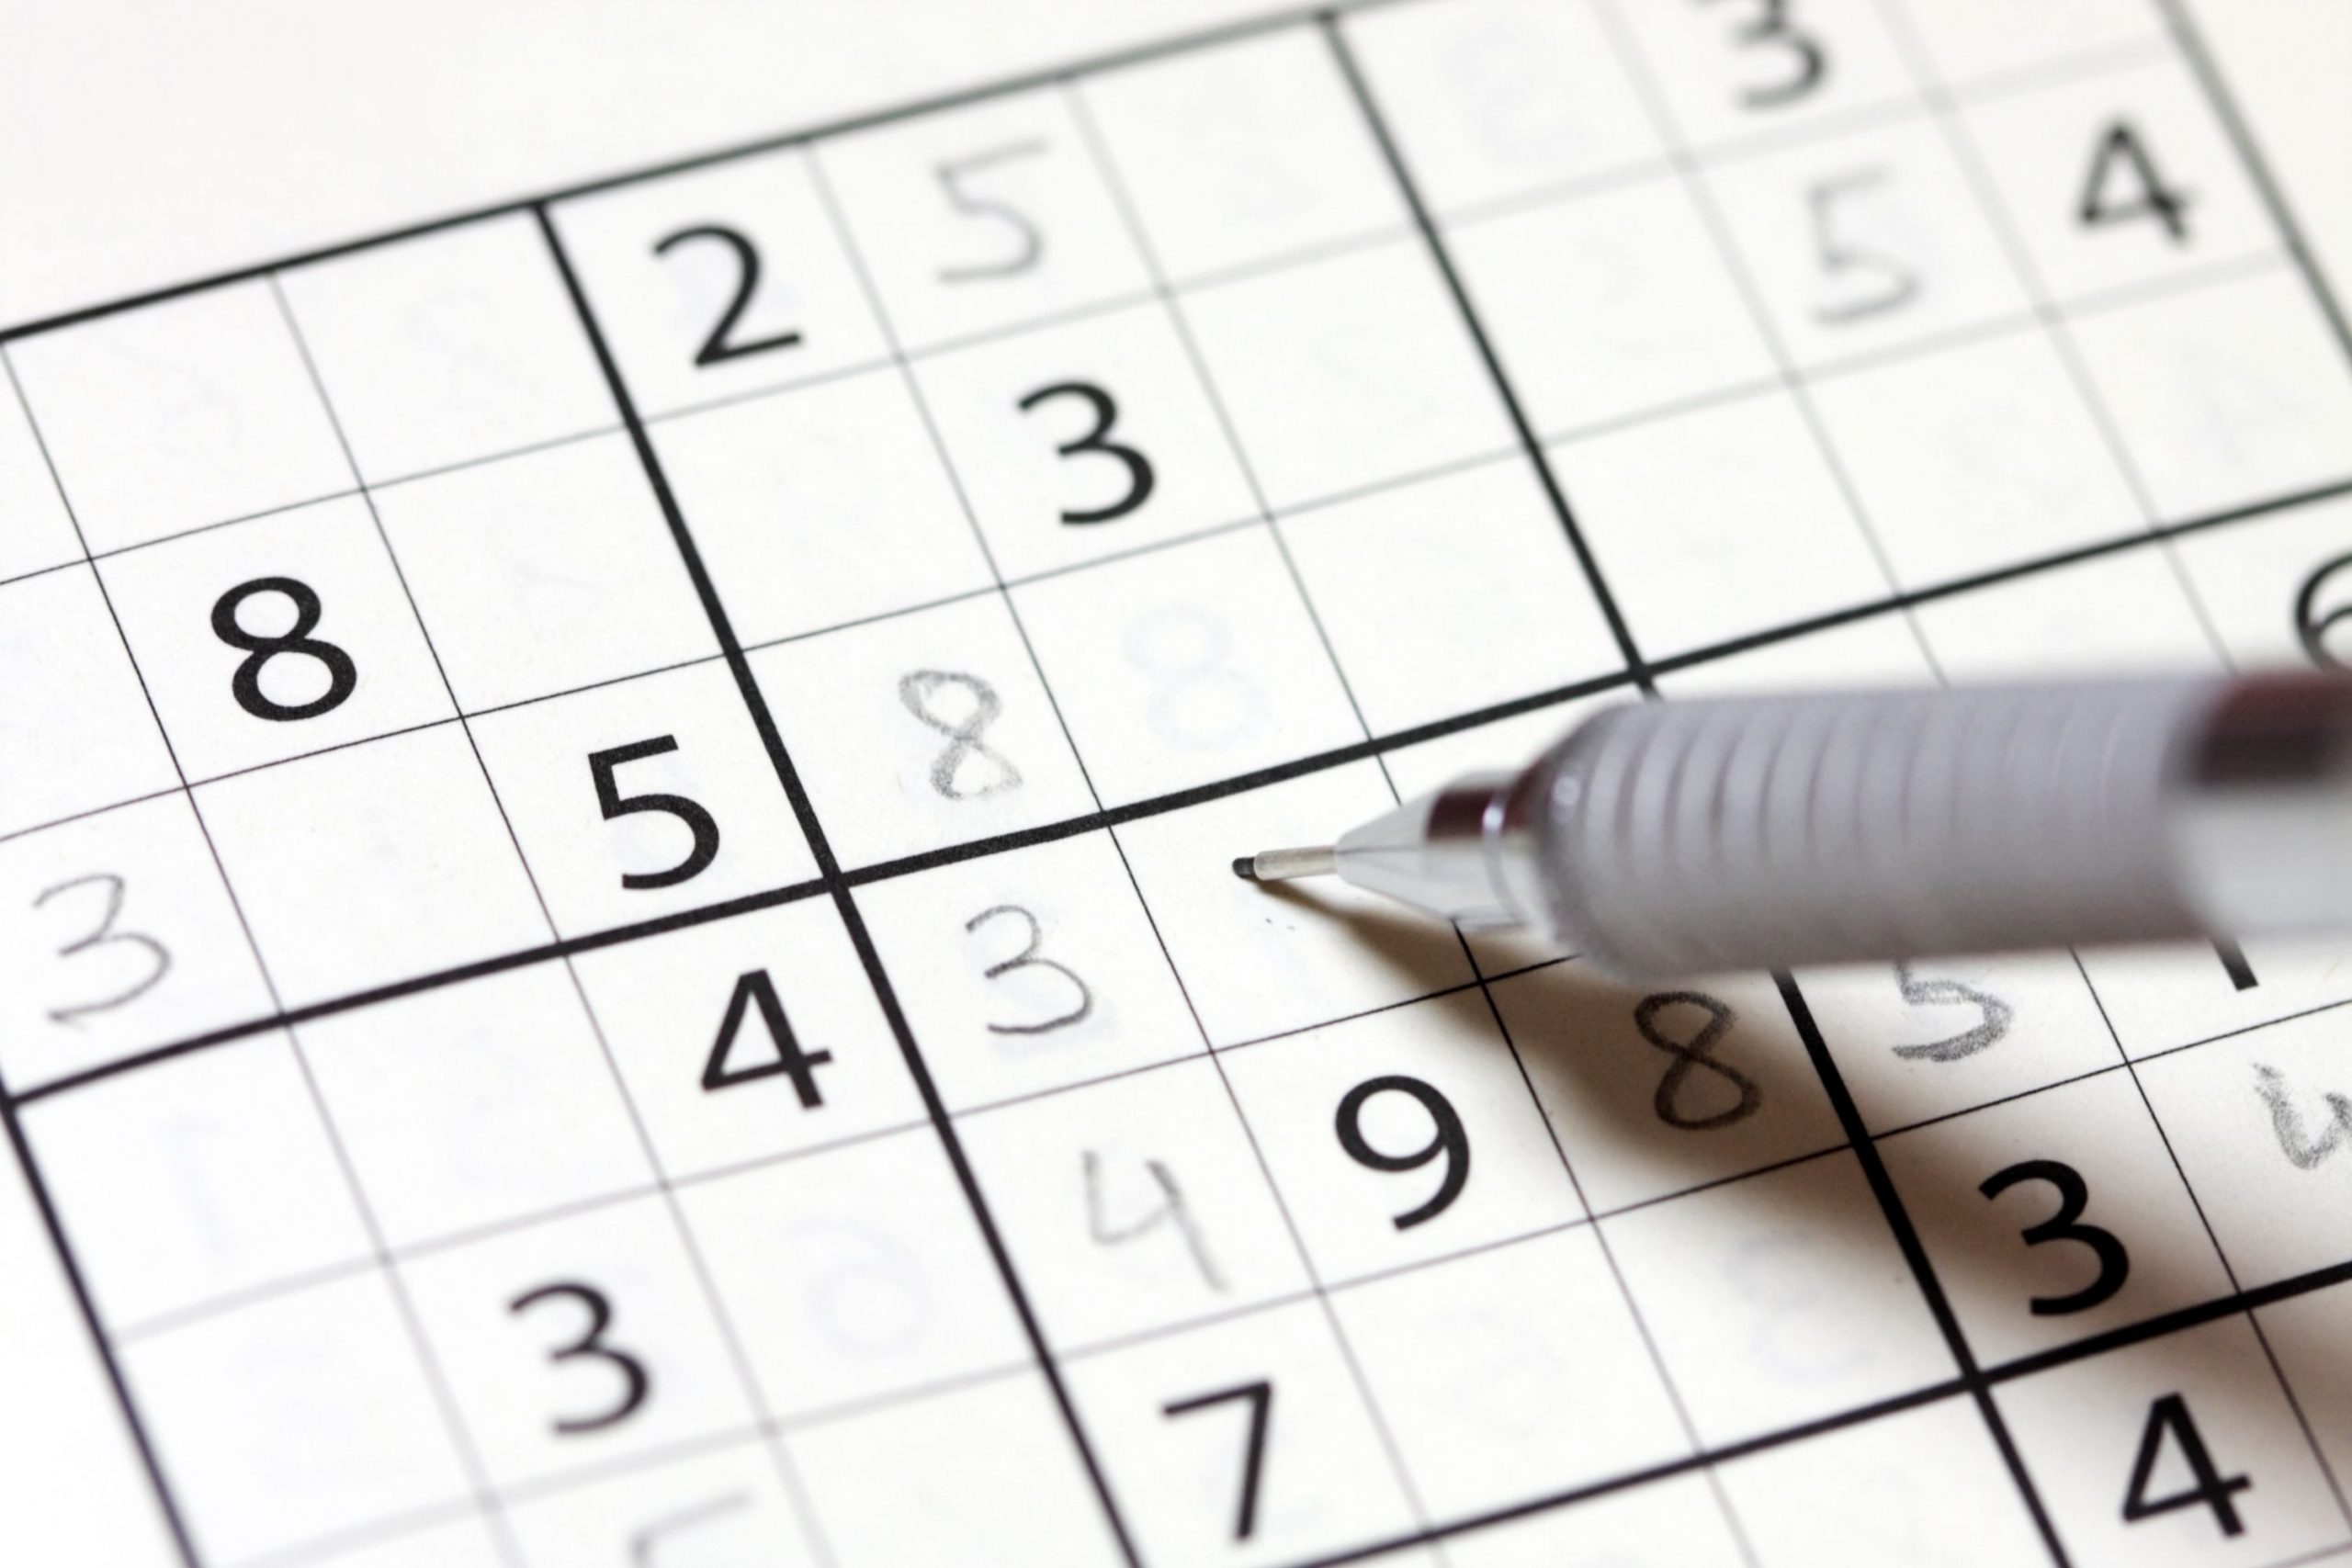 Where To Find Free Sudoku Printable Puzzles